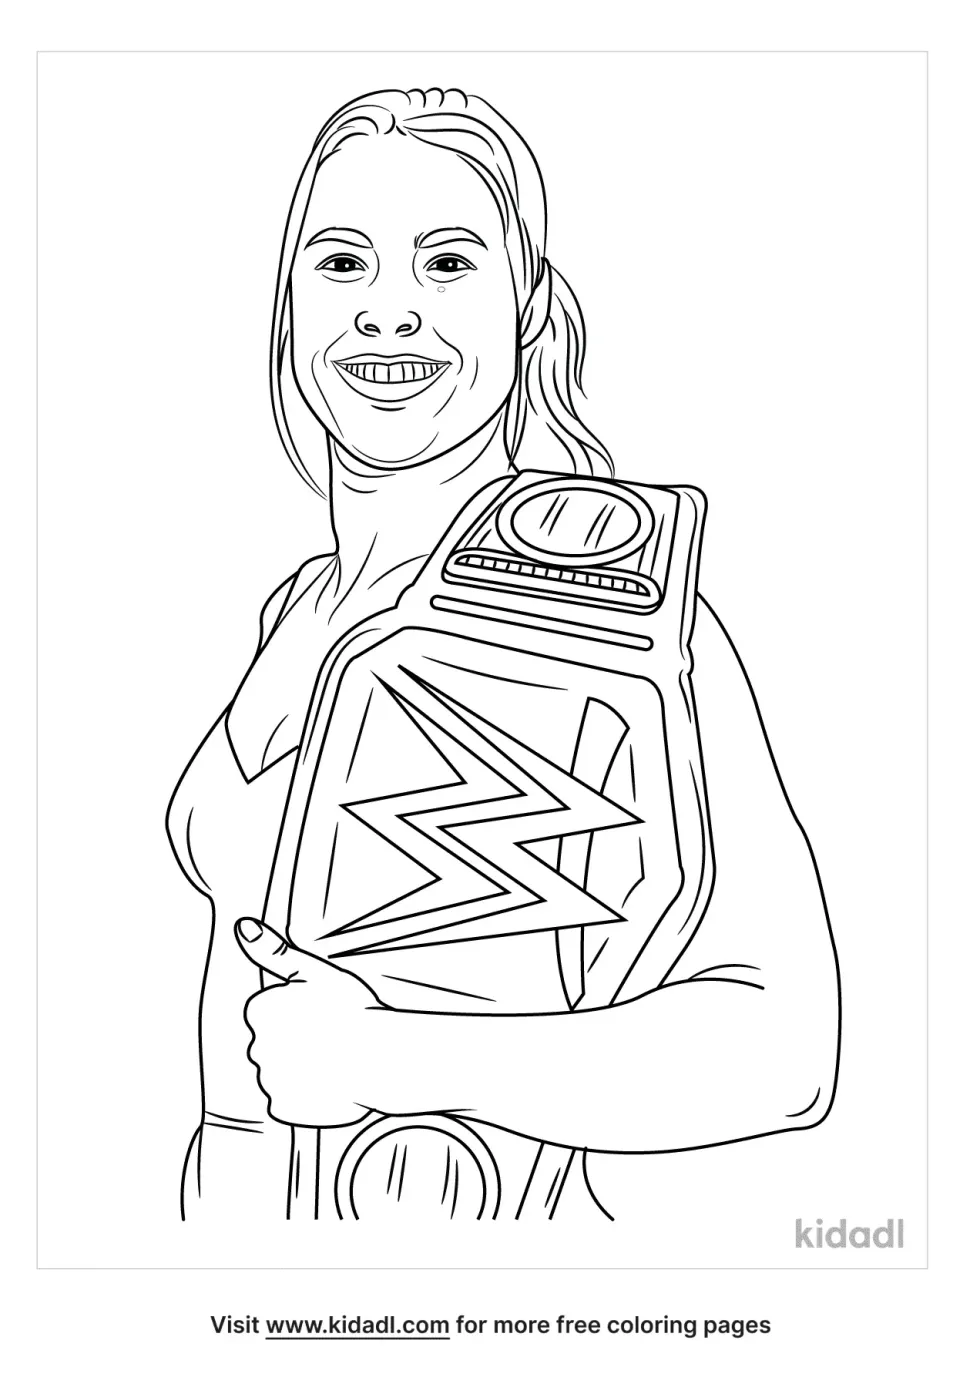 Rhonda Rousey Coloring Page